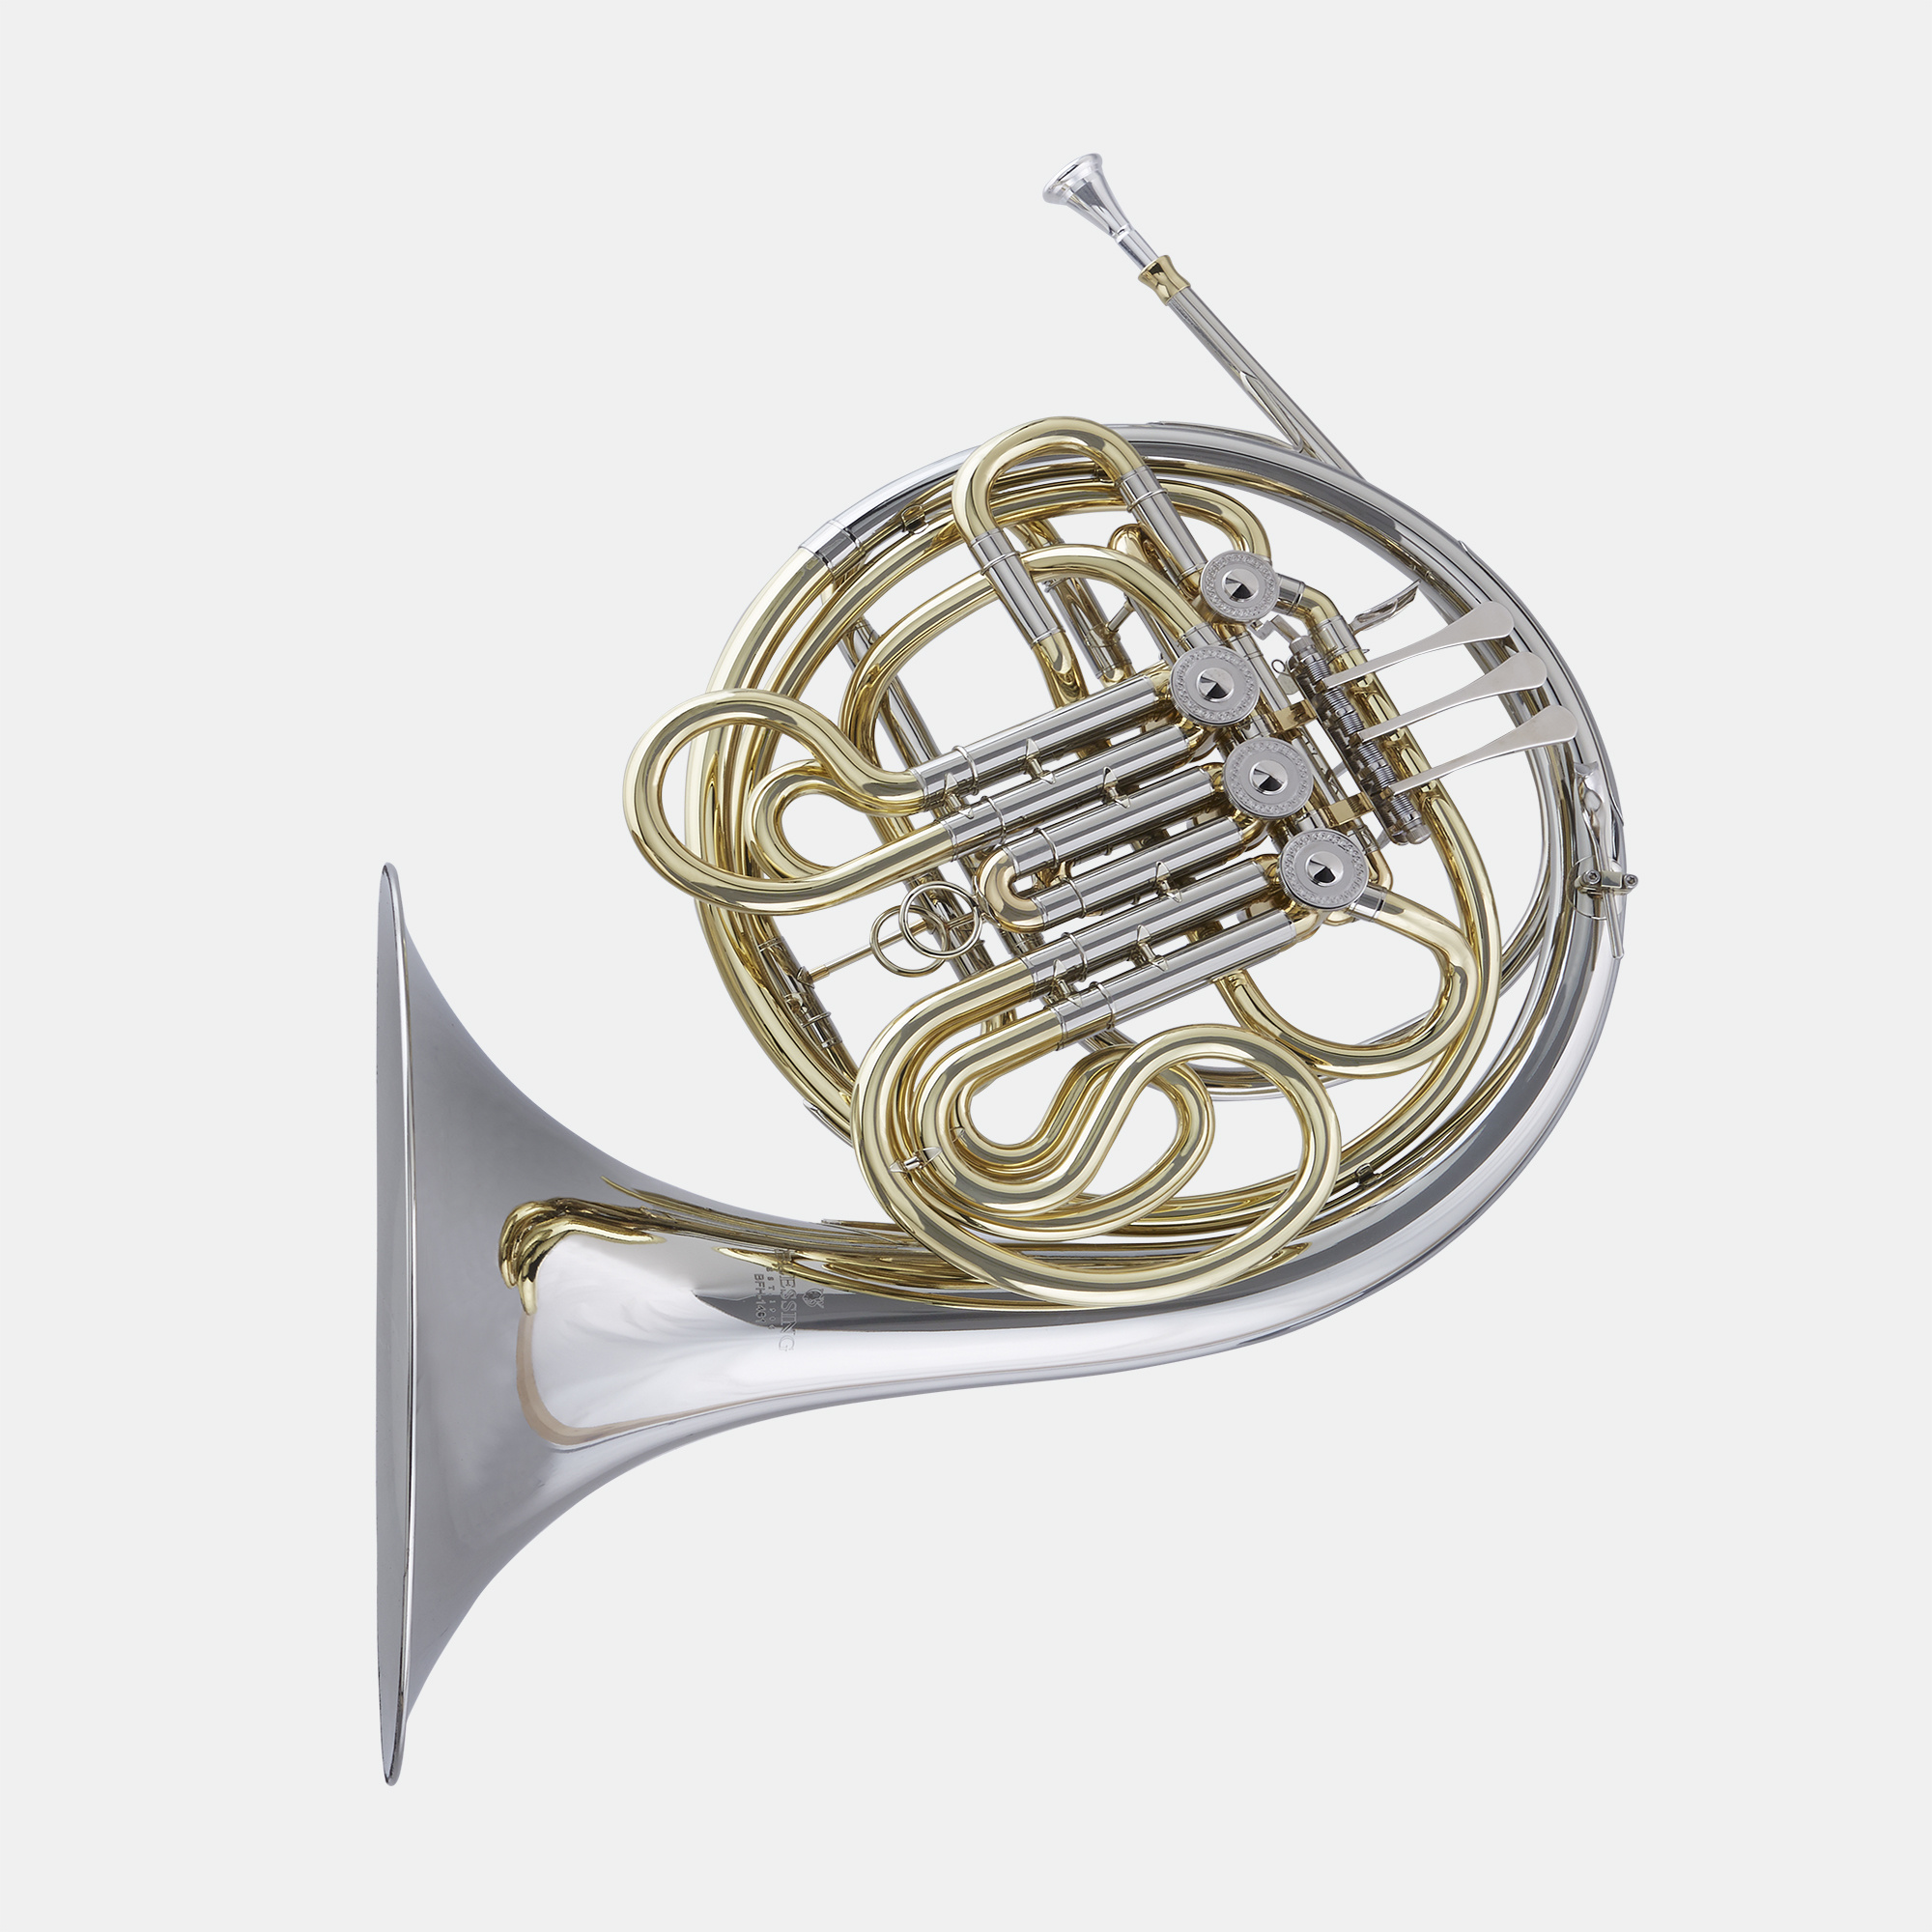 Blessing Blessing BFH-1461N Double French Horn